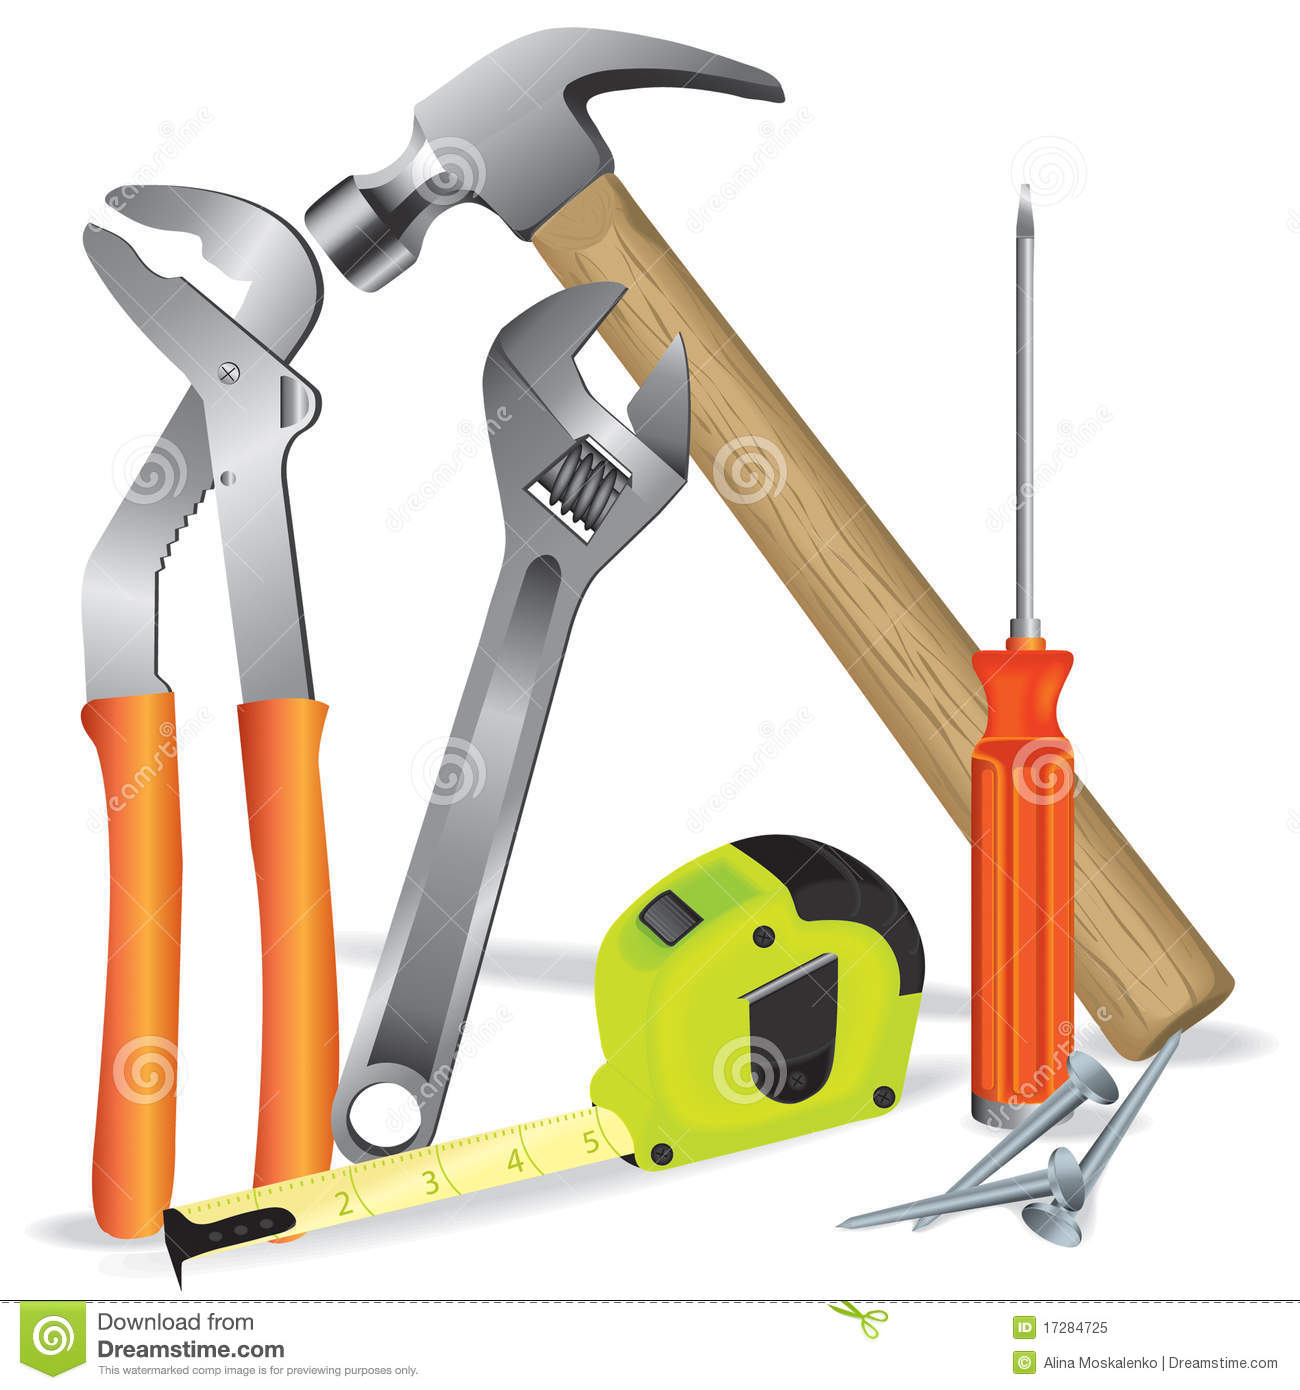 Construction tool clipart.